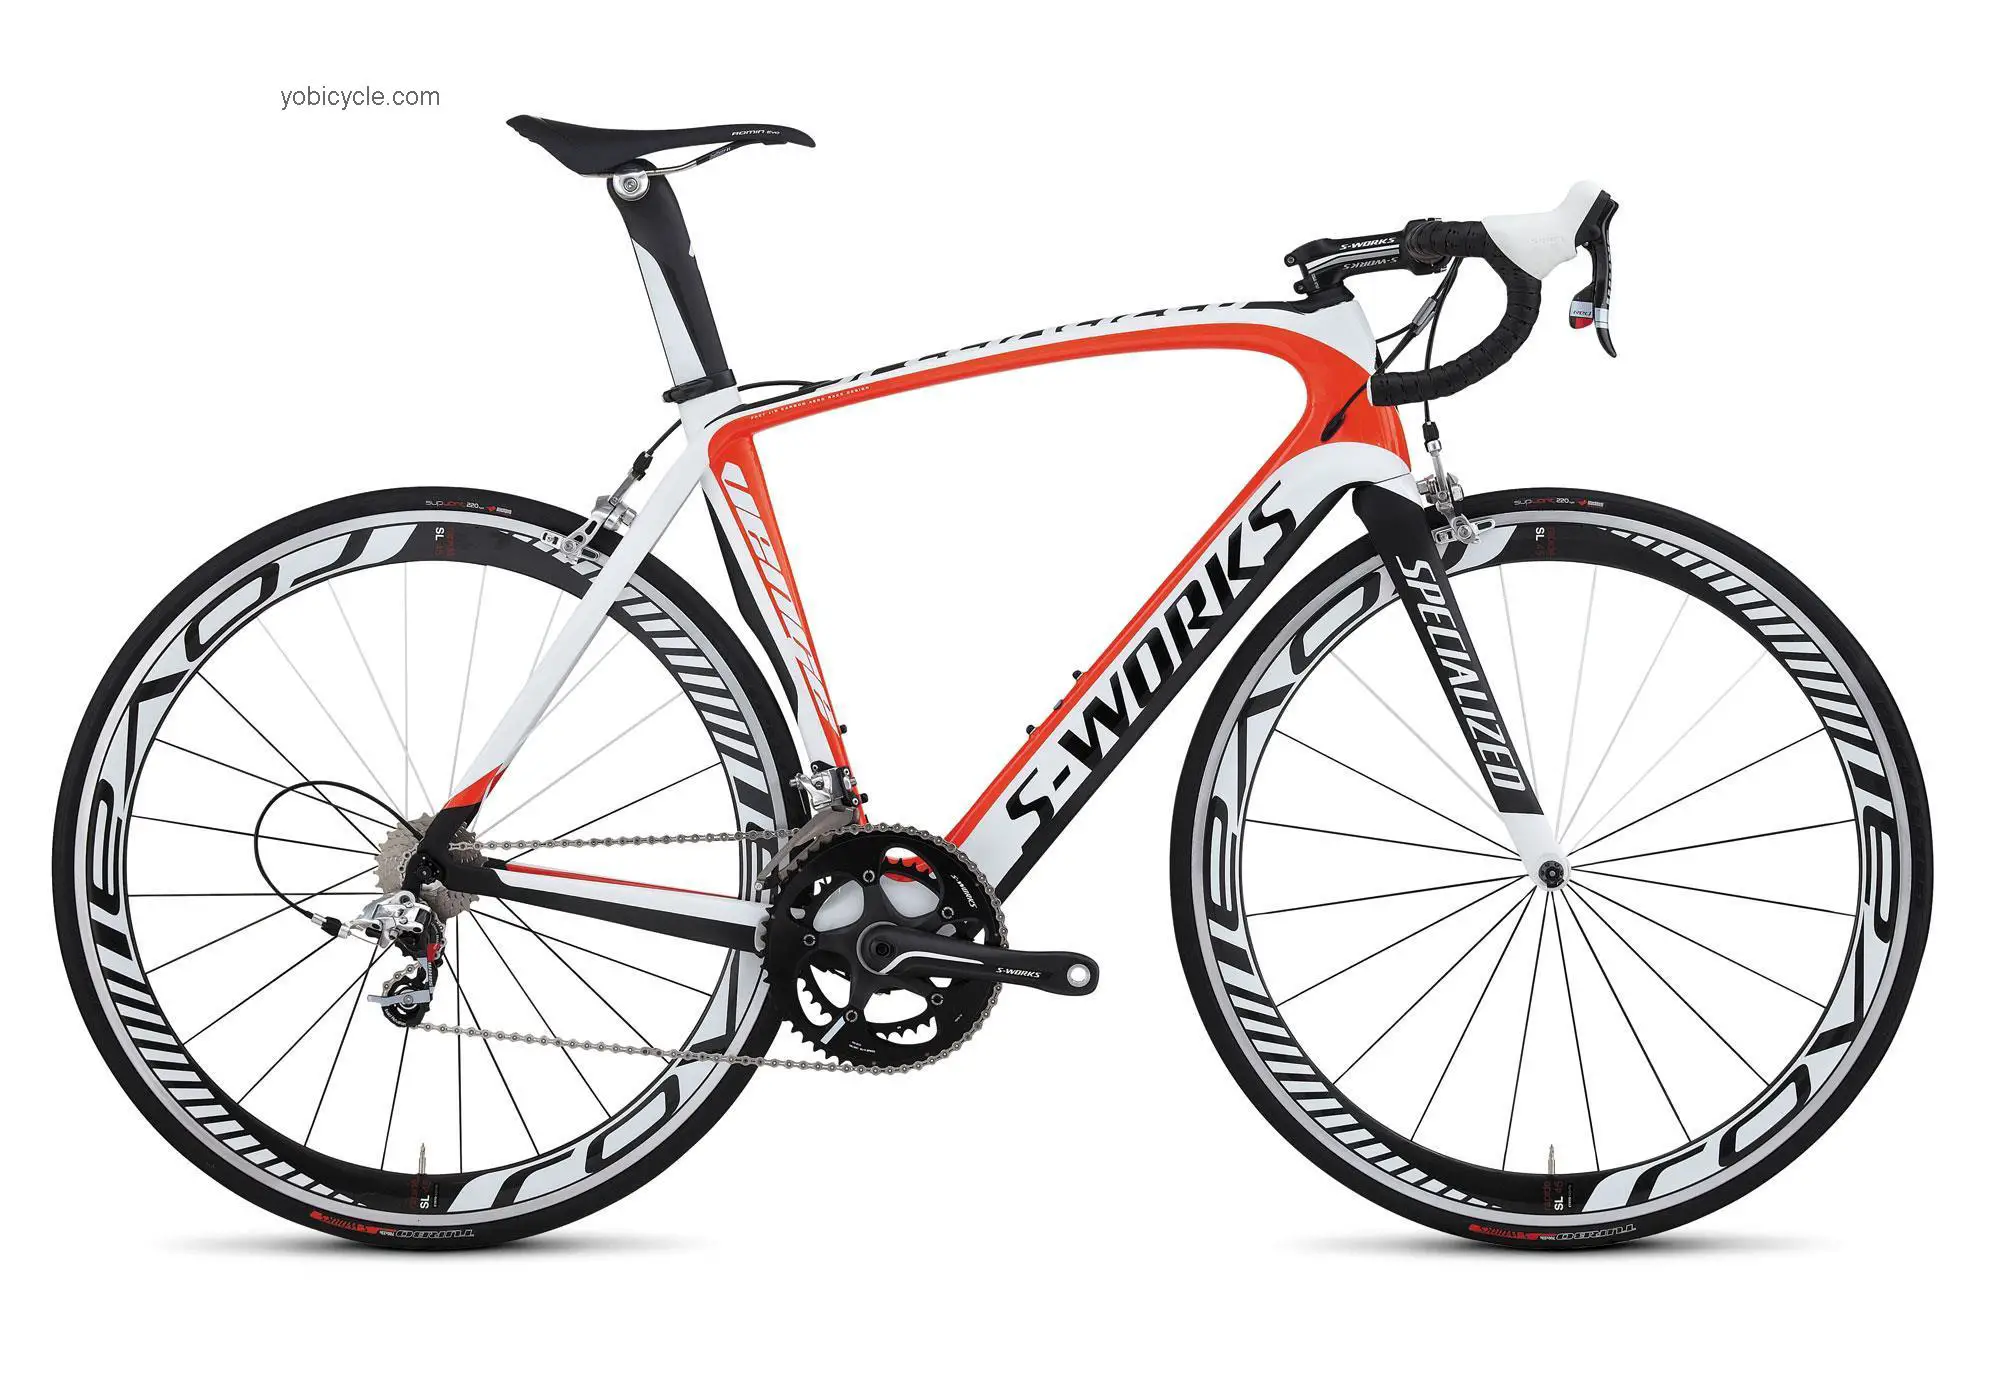 Specialized S-Works Venge Red 2012 comparison online with competitors